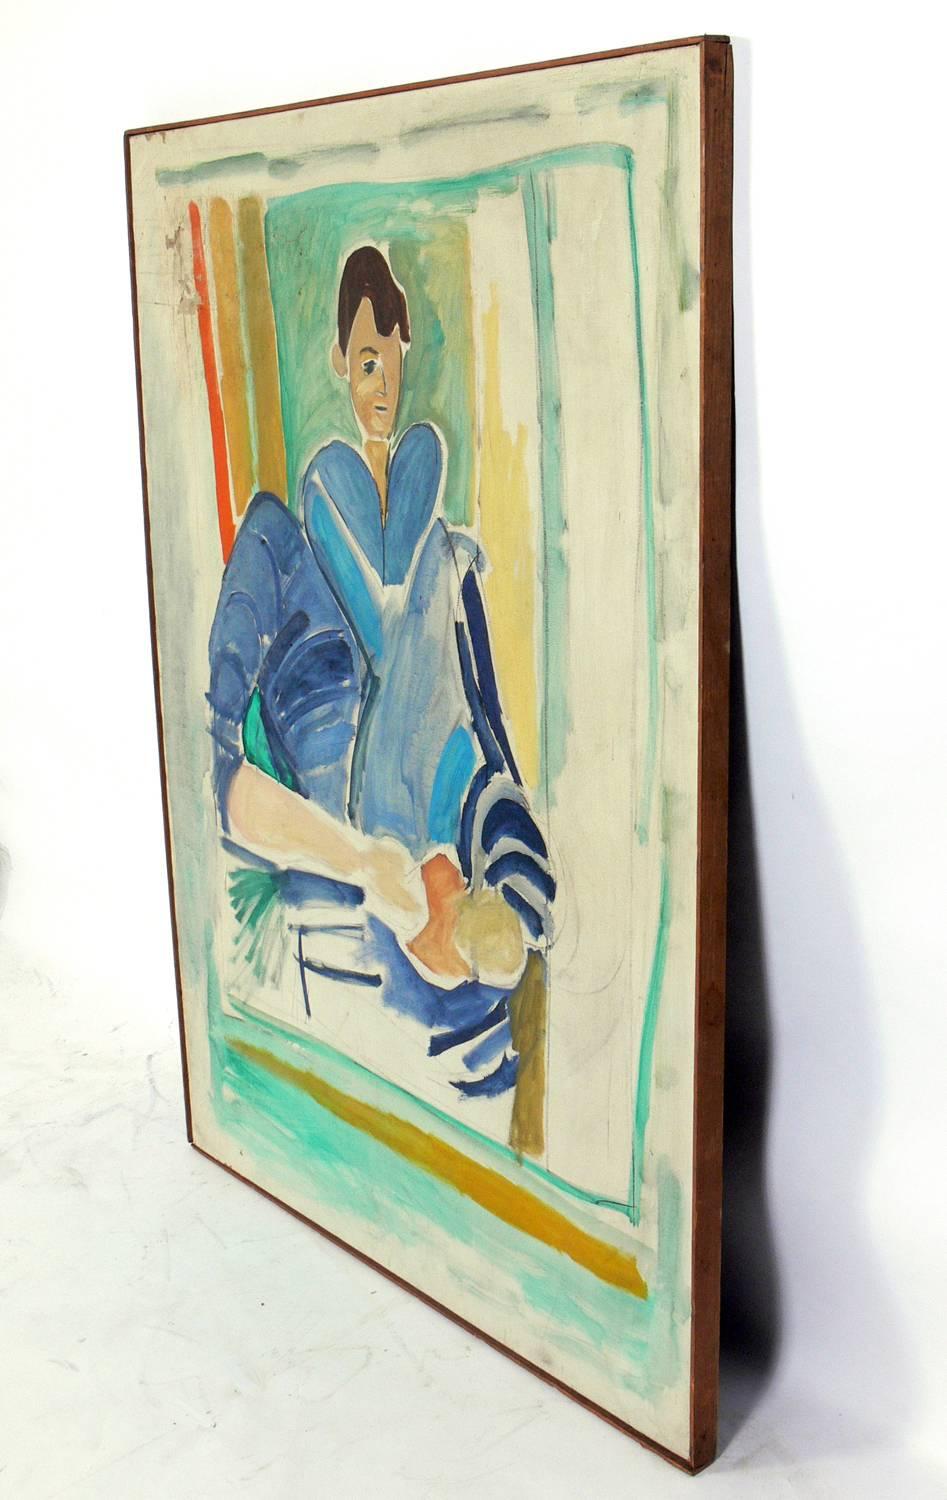 Large-scale modernist portrait painting in the manner of Francis Bacon, probably American, circa 1960s. Artist unknown, not signed or marked in any way. Painting has overall craquelure from age and an area of wear to painting finish at upper left.